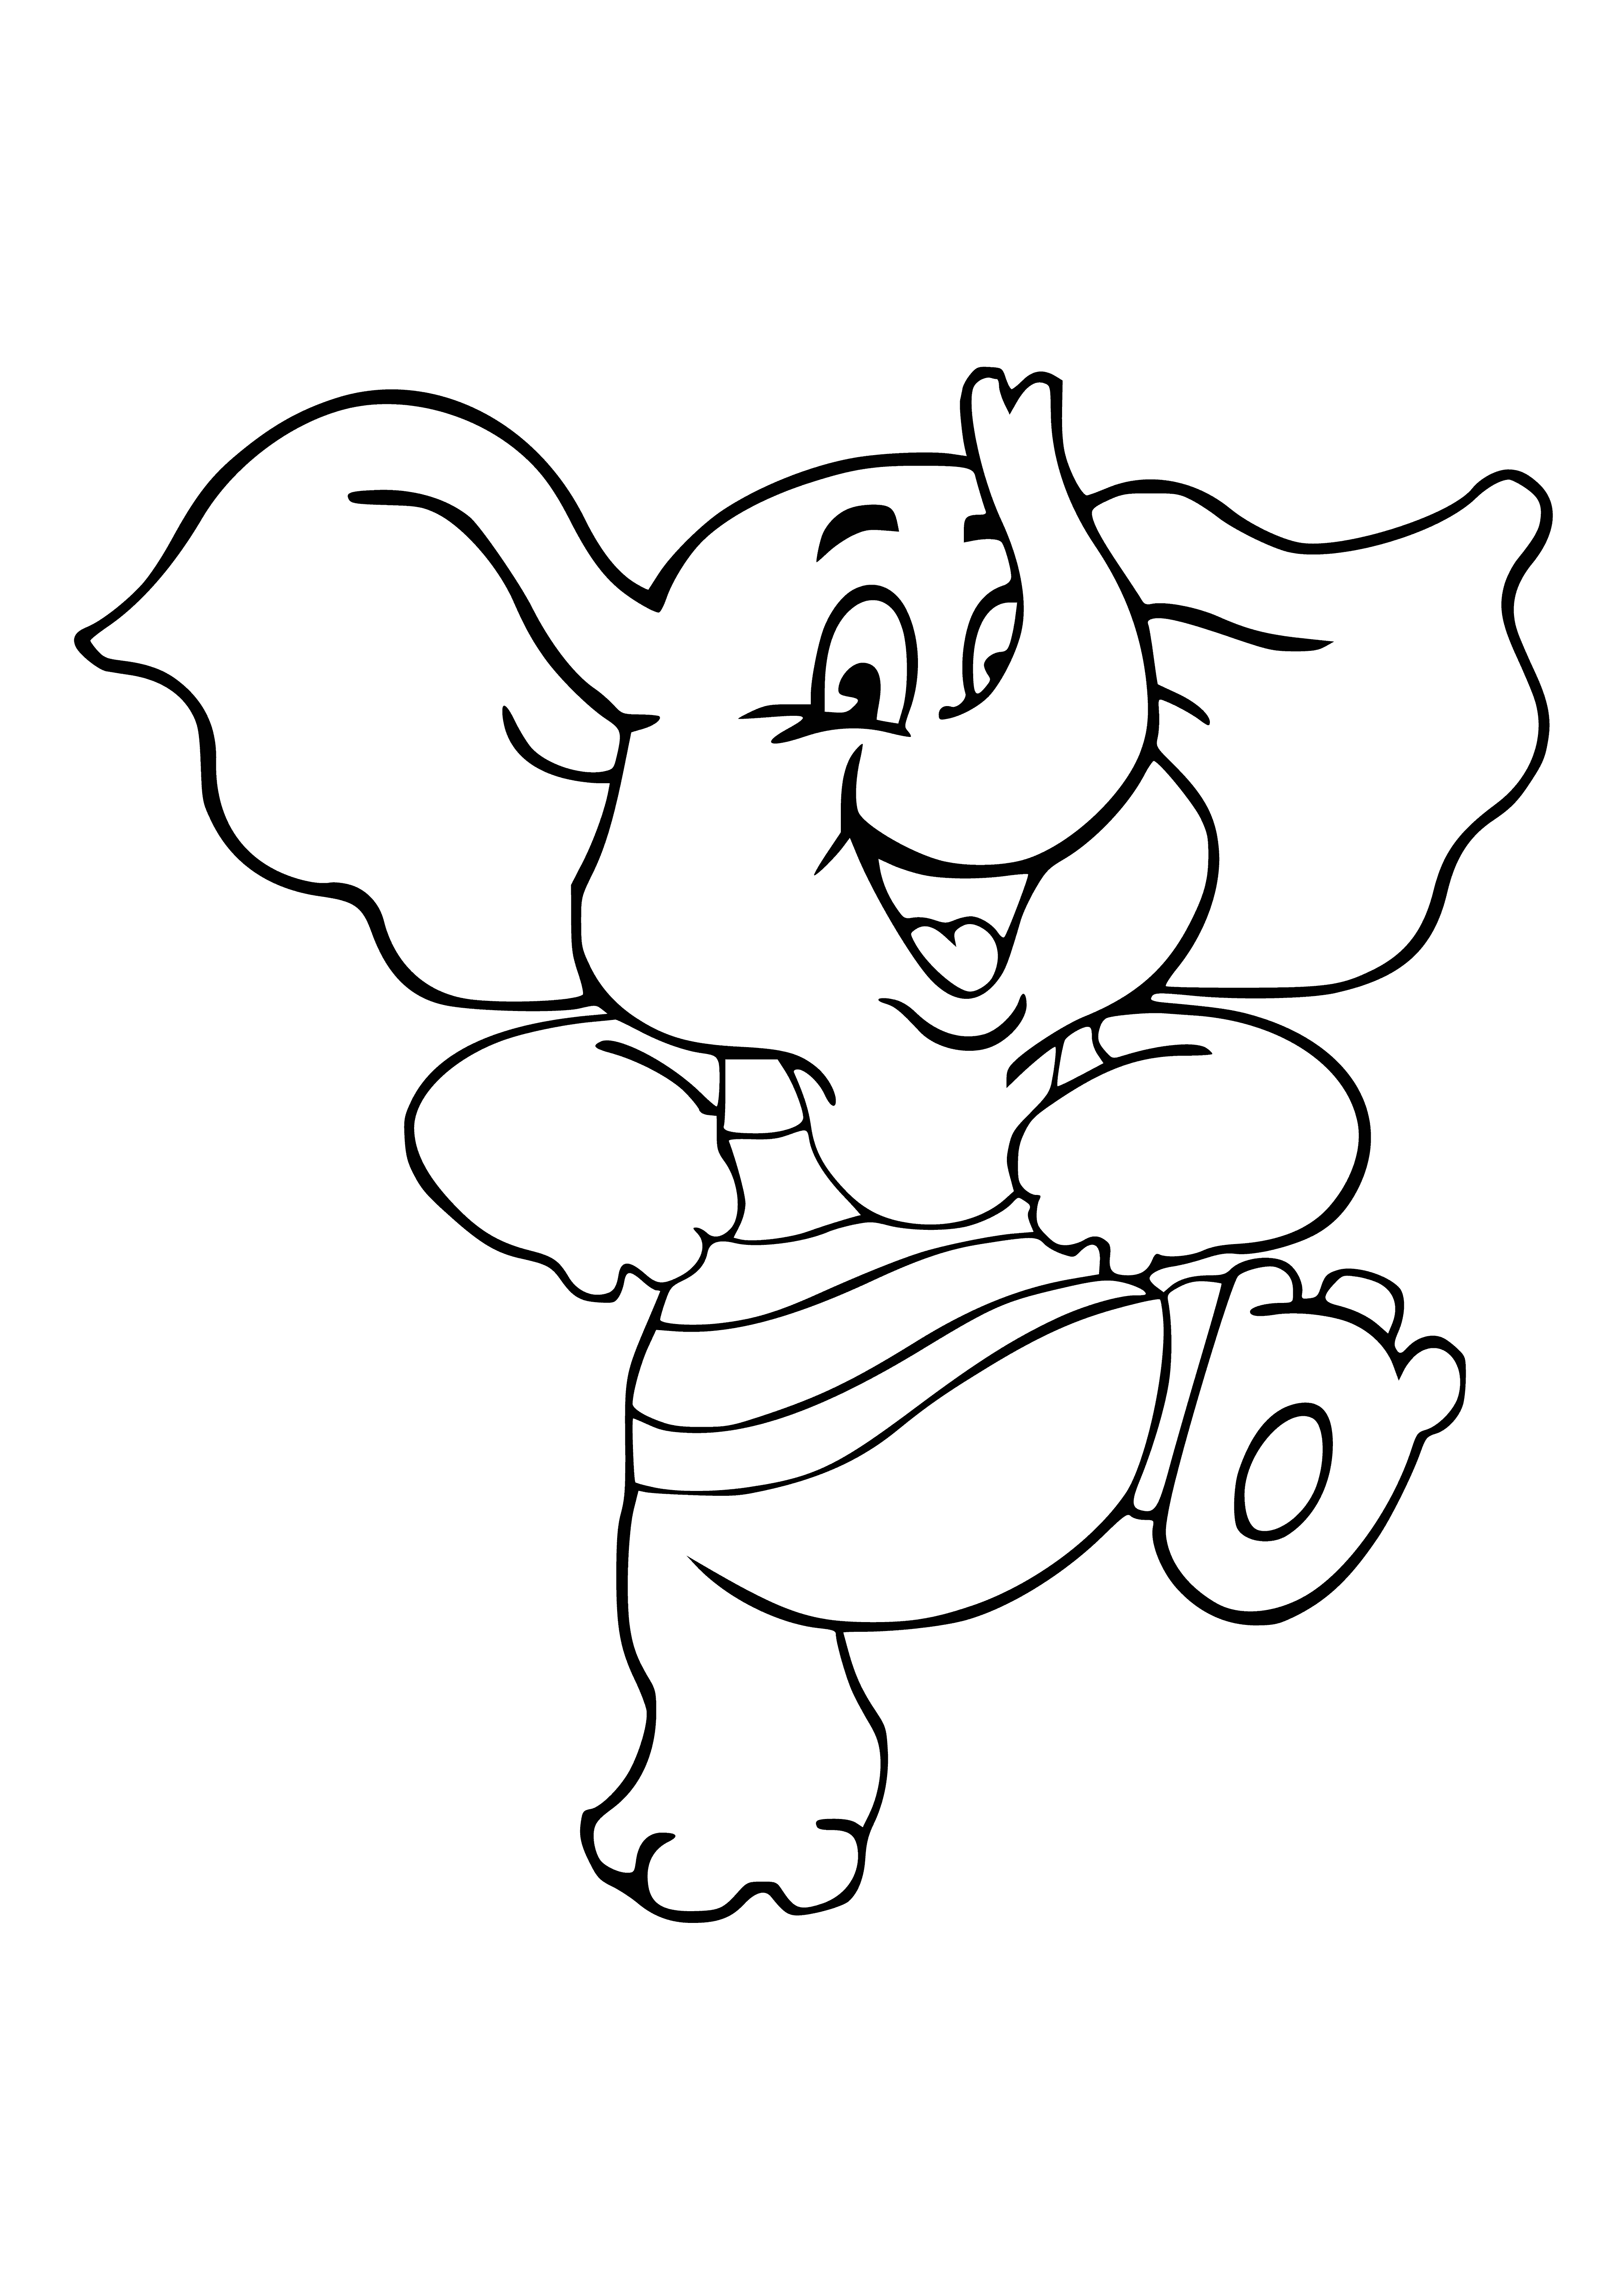 coloring page: An elephant stands in a cloudy but sunny field raising its trunk.